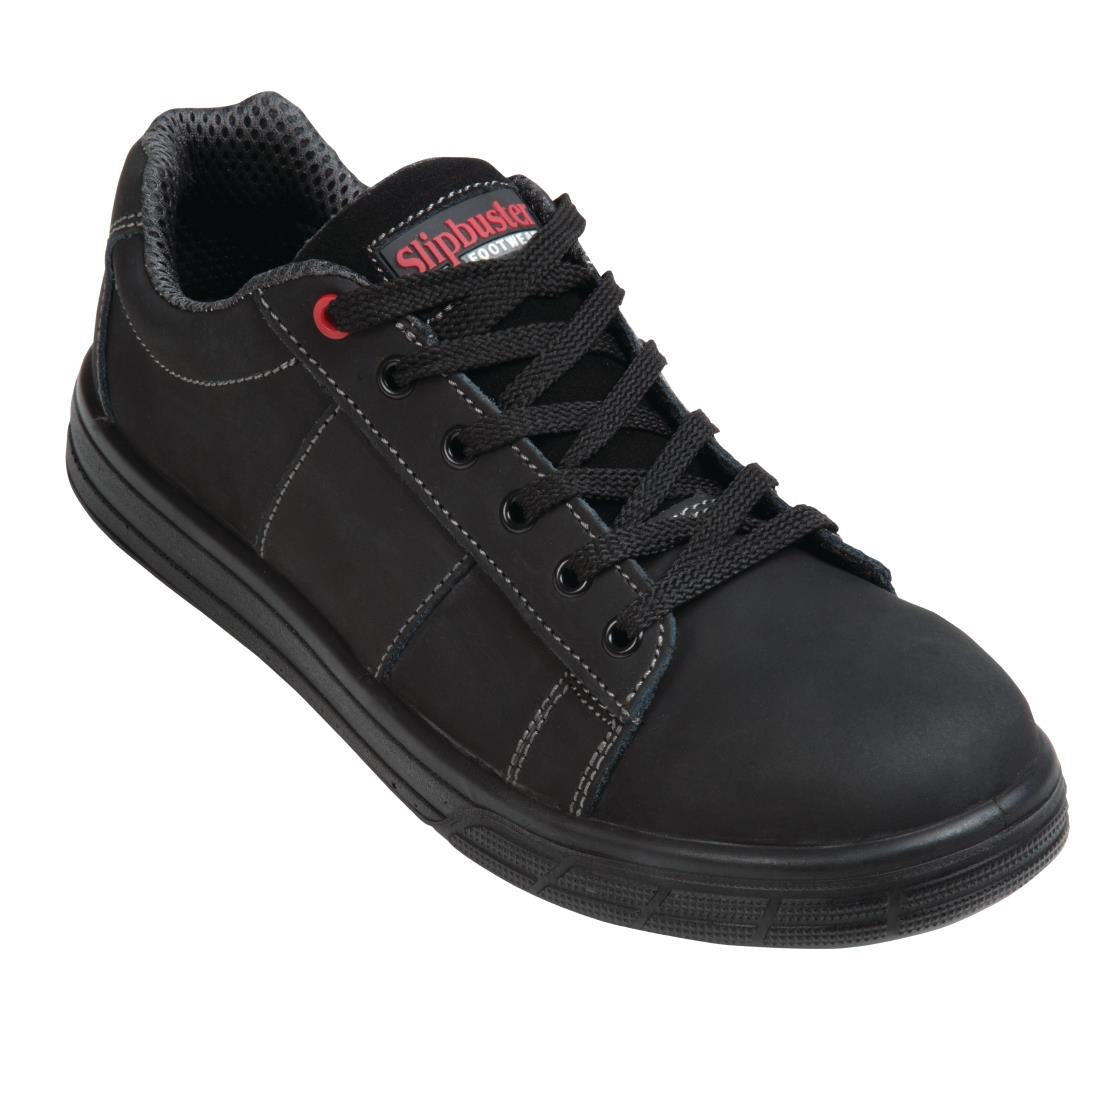 BB420-41 Slipbuster Safety Trainers Black 41